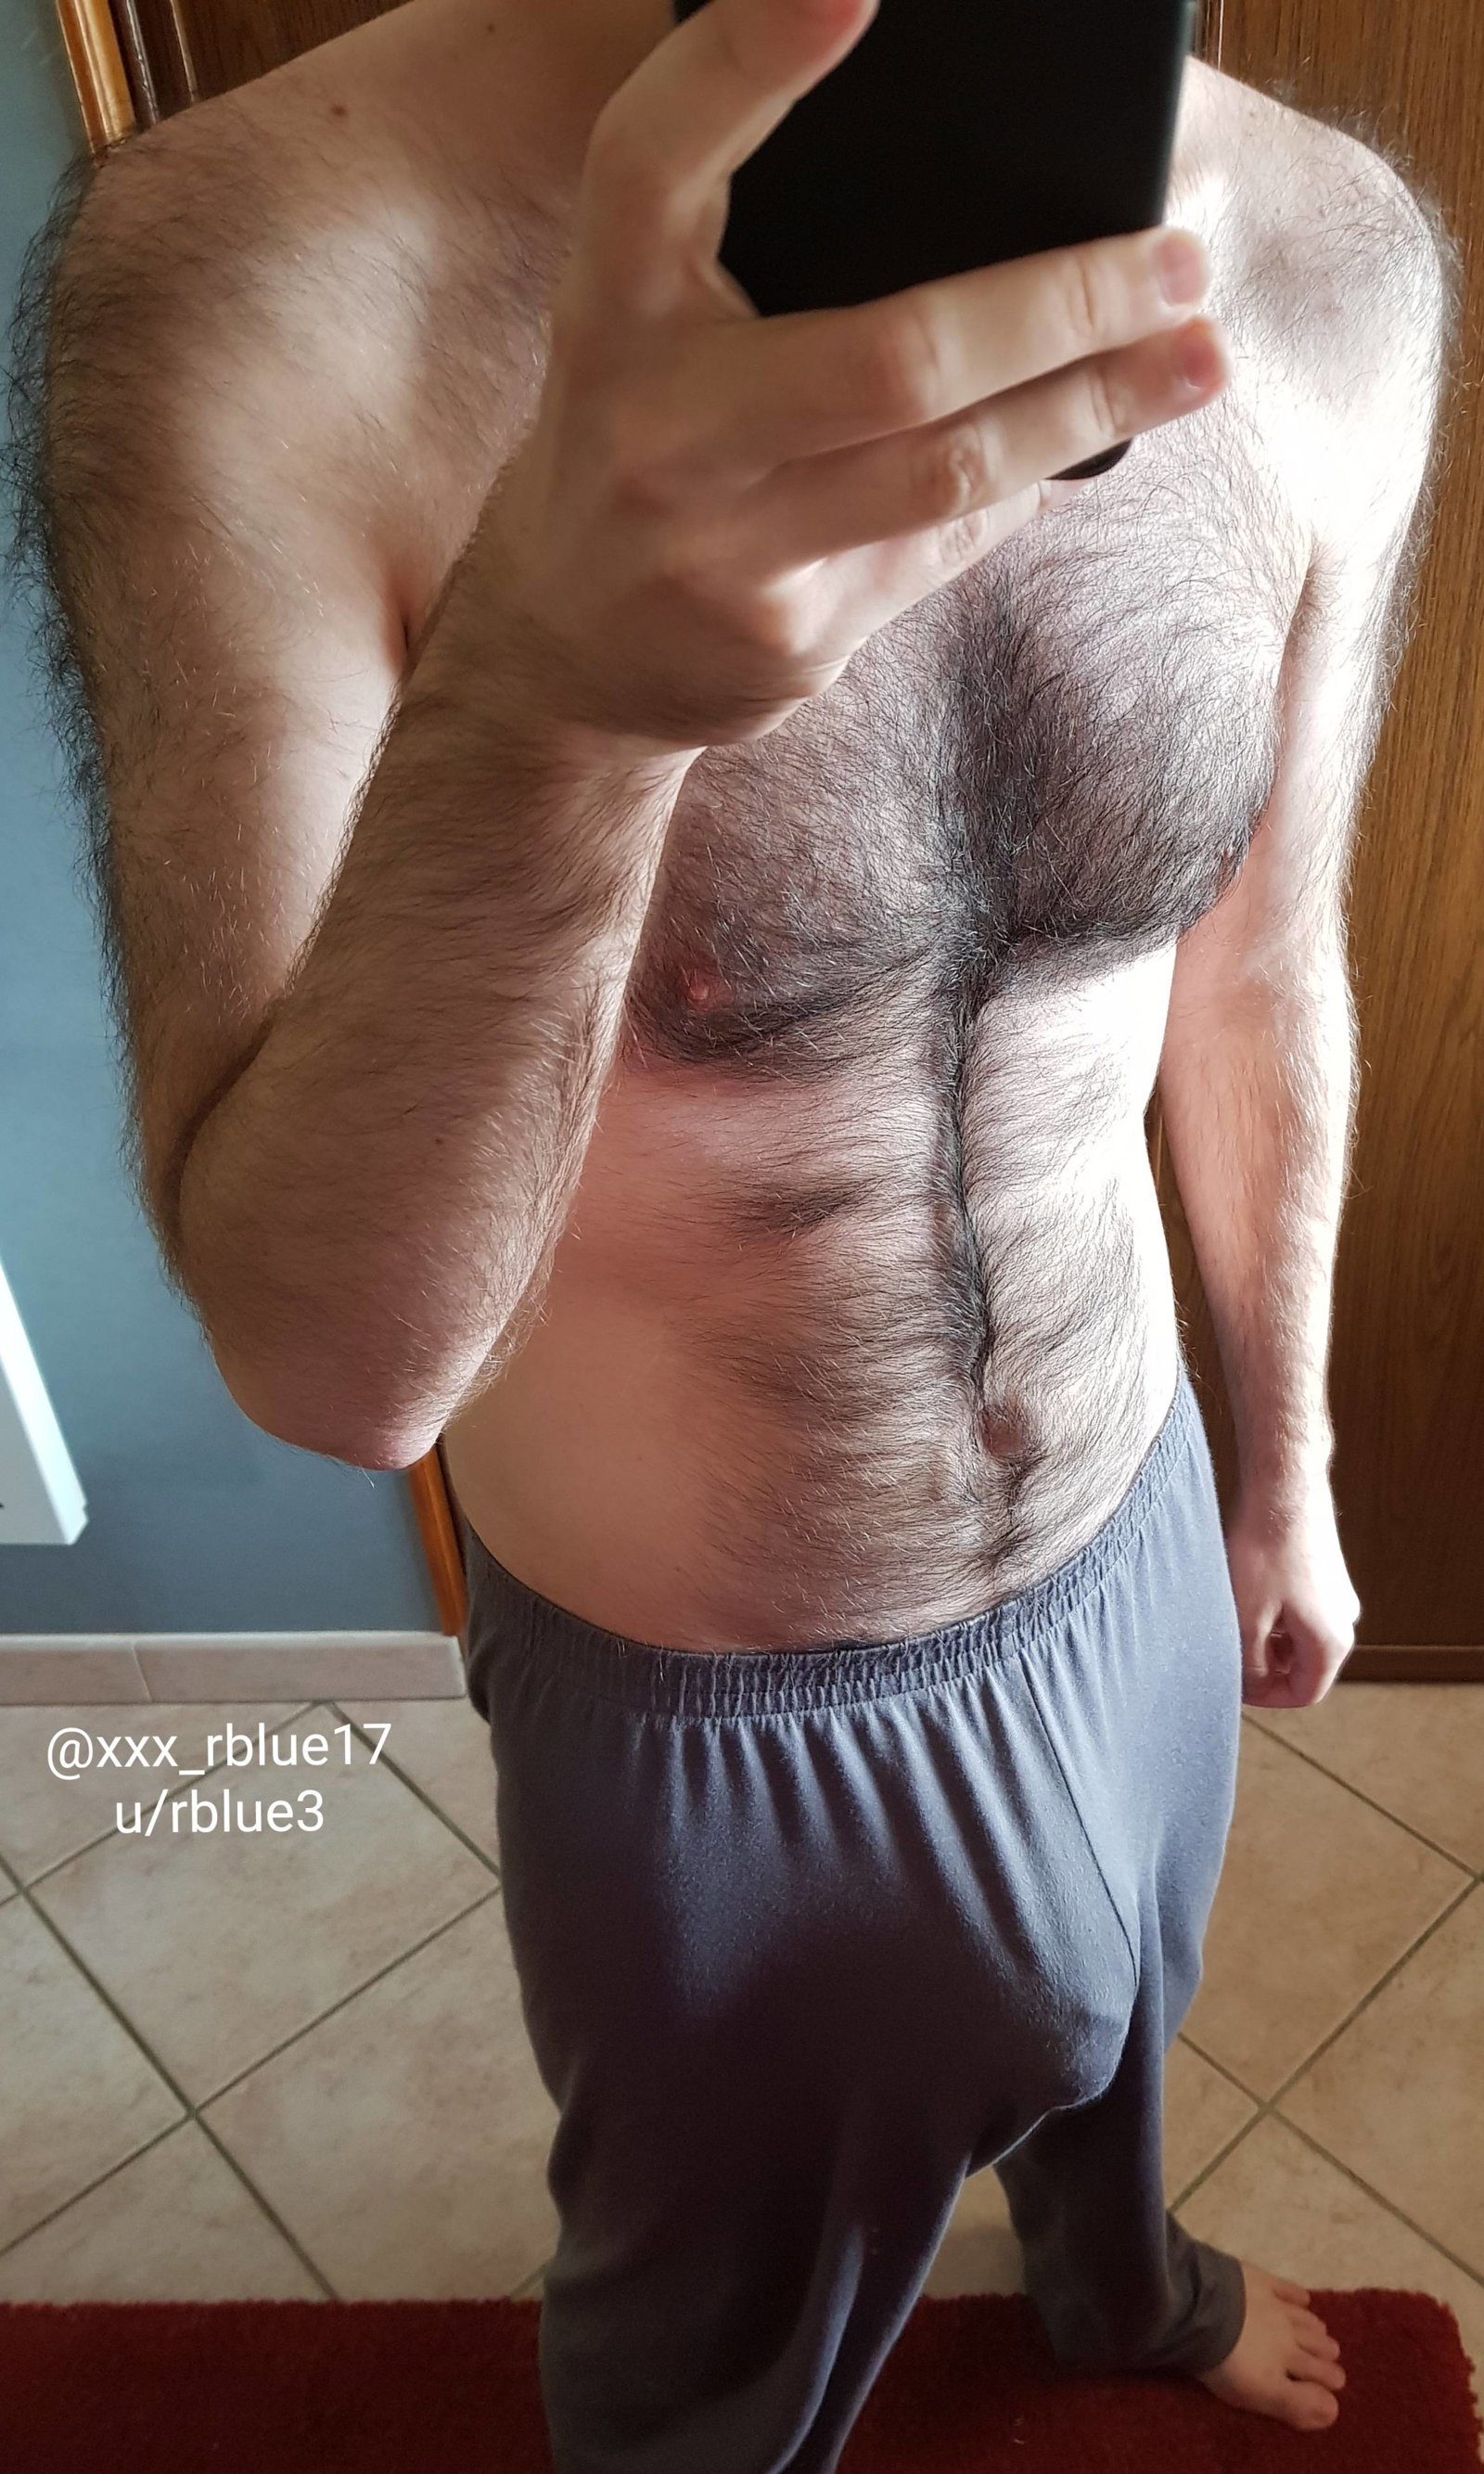 Photo by rblue with the username @rblue17,  October 23, 2019 at 11:02 AM. The post is about the topic GayExTumblr and the text says 'These pyjama pants don't leave much to the imagination... https://i.imgur.com/3nKojZY.jpg'